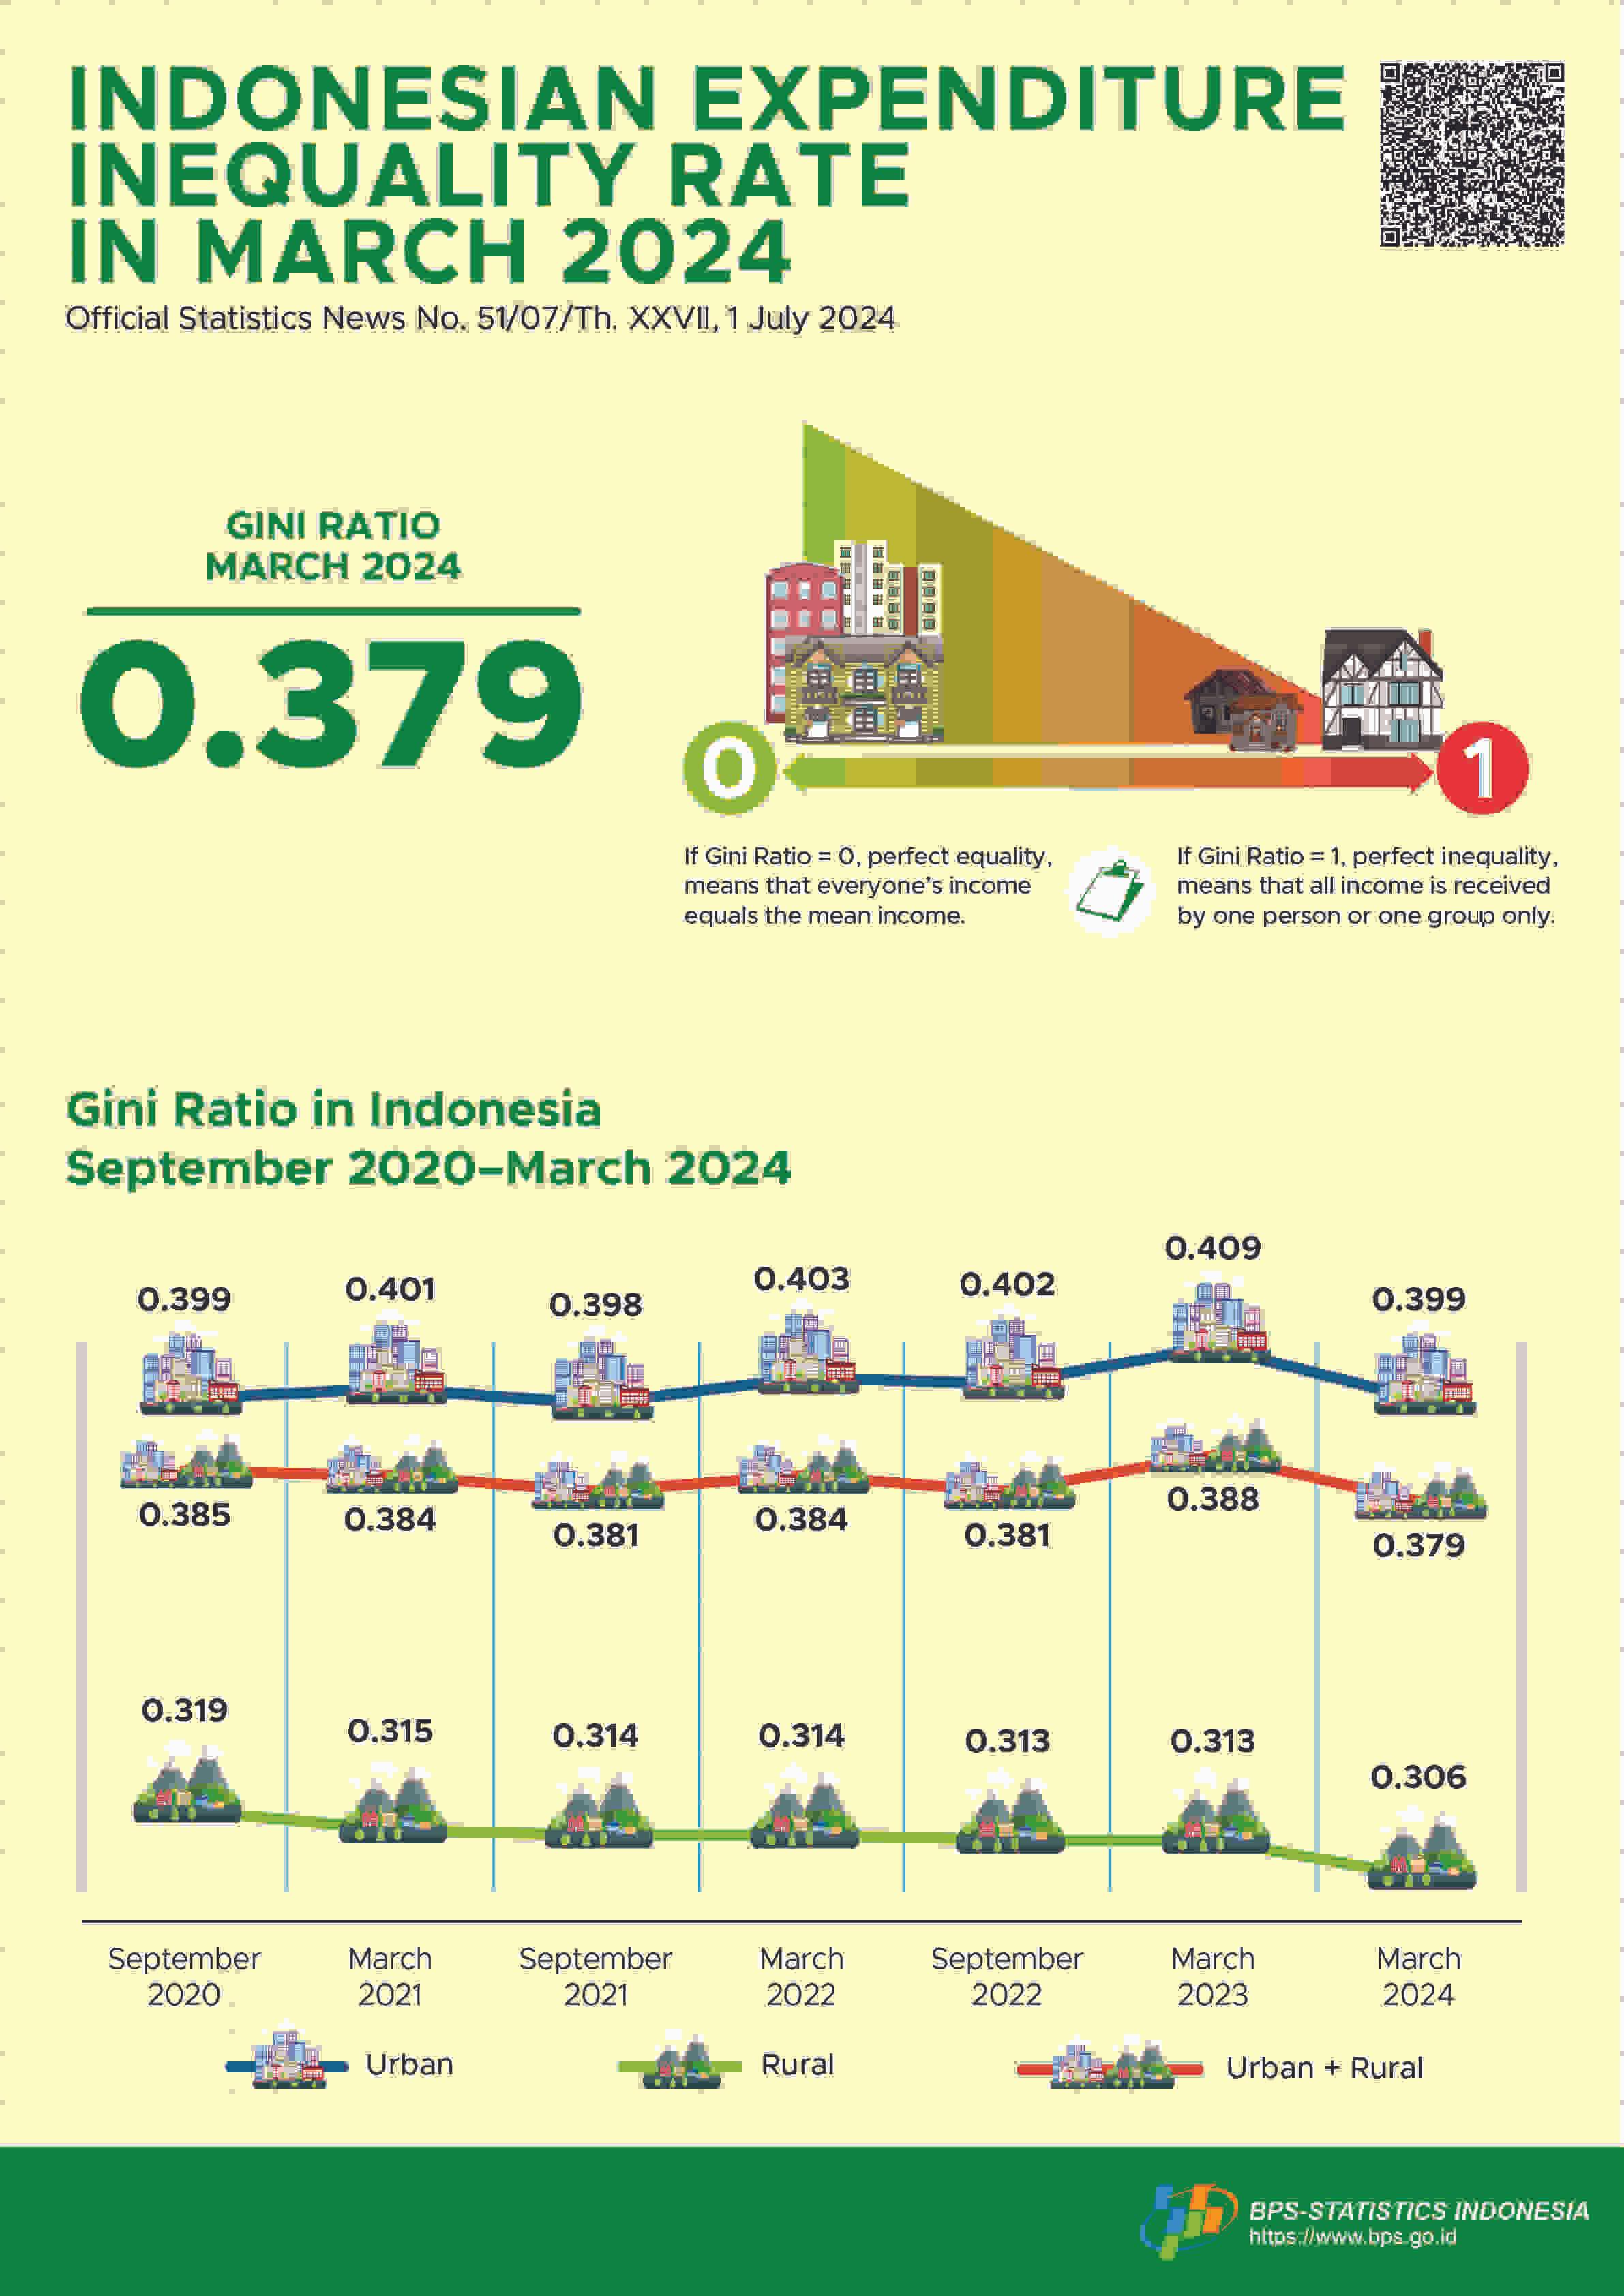 Gini ratio in March 2024 was 0.379.